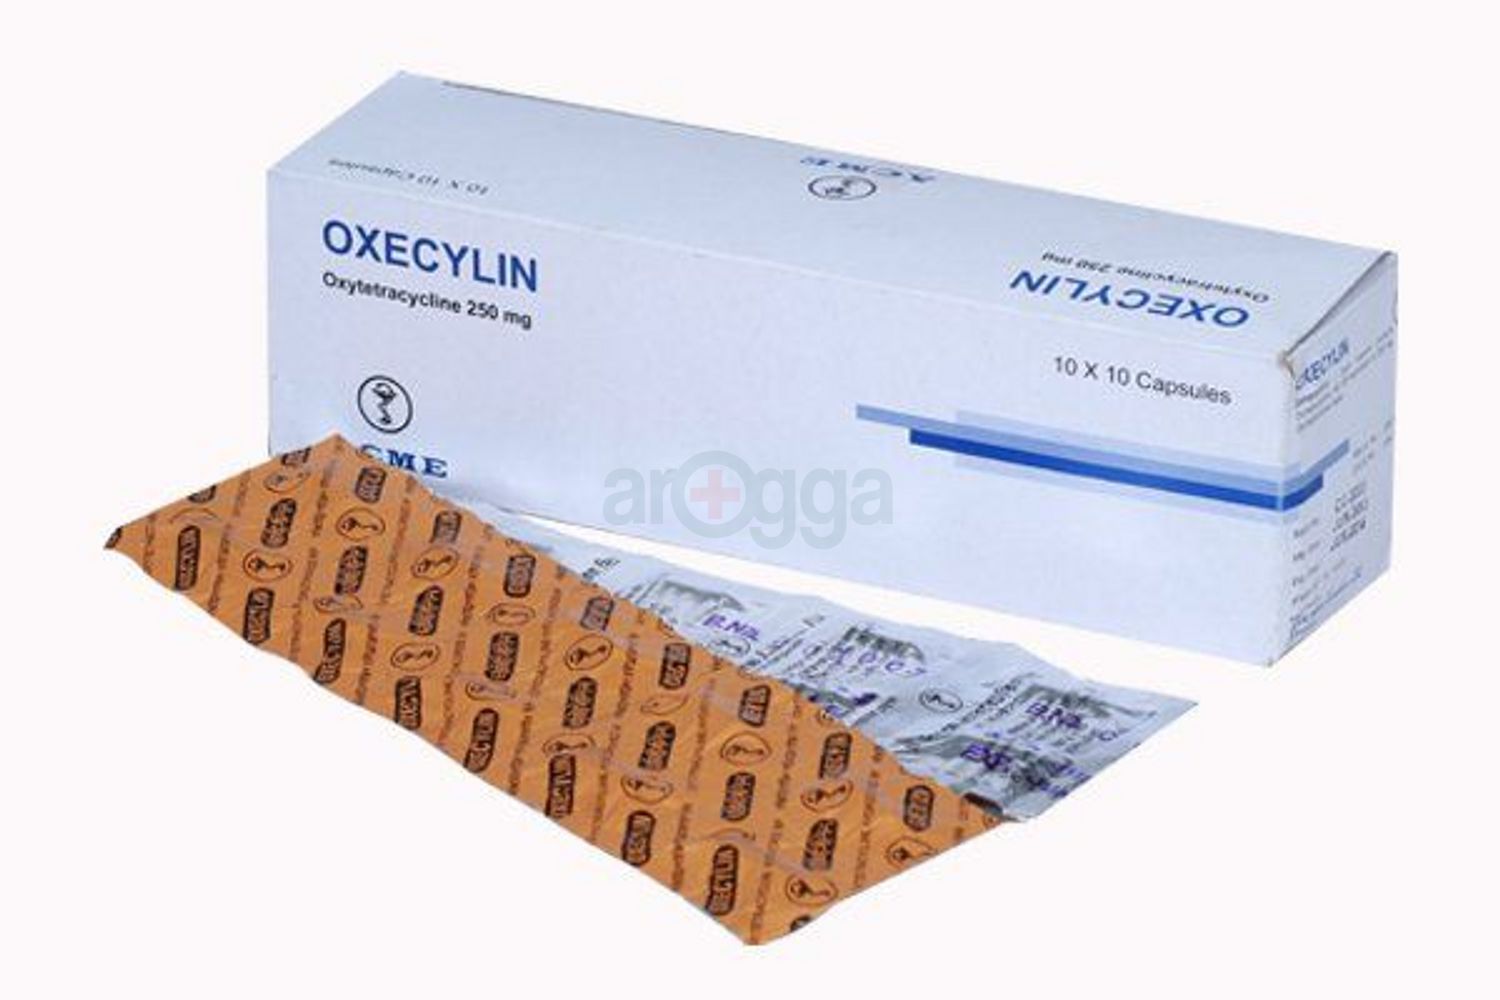 Oxecylin